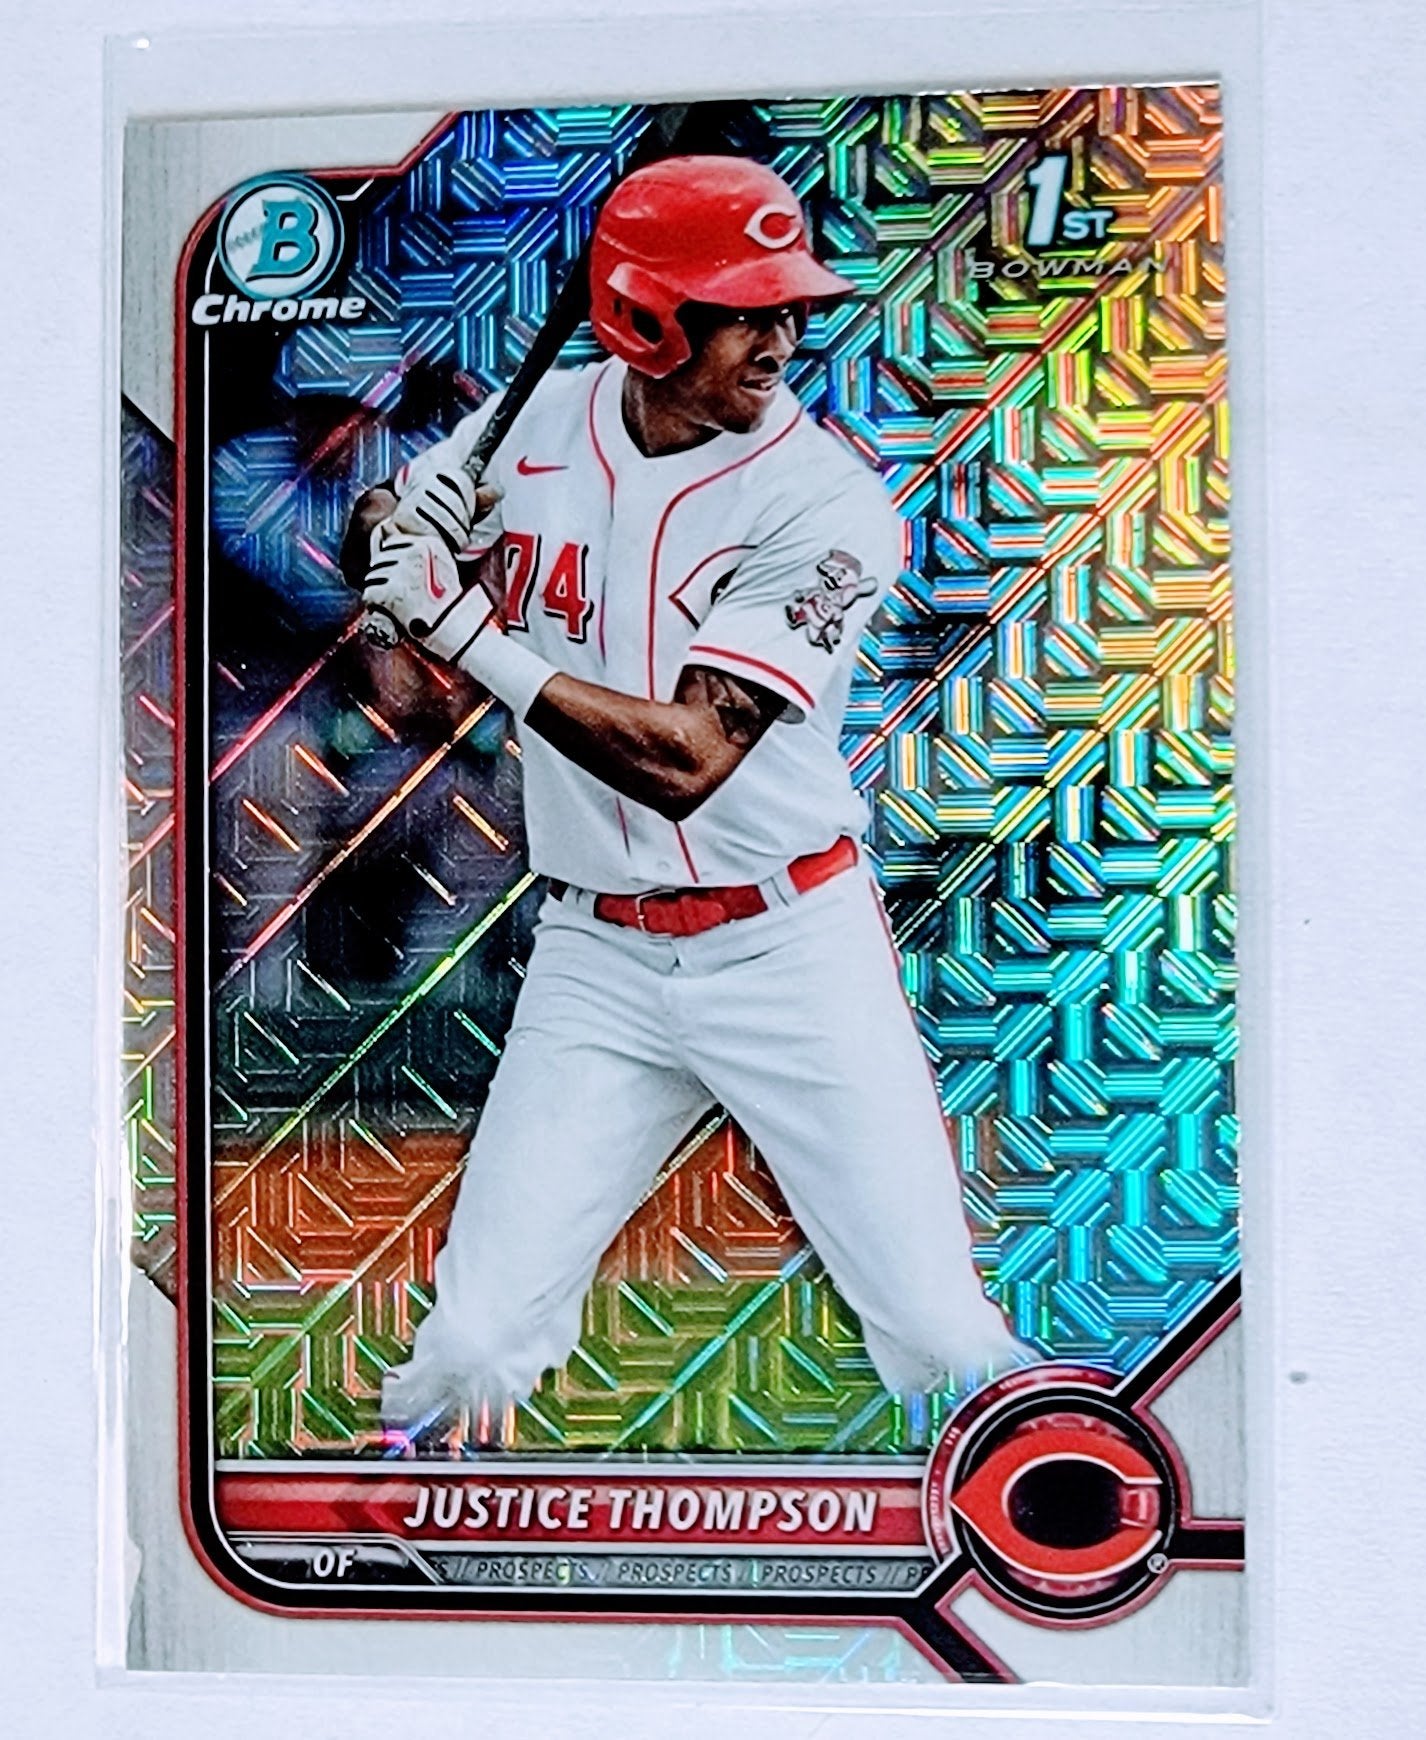 2022 Bowman Chrome Justice Thompson 1st on Bowman Mojo Refractor Baseball Trading Card SMCB1 simple Xclusive Collectibles   